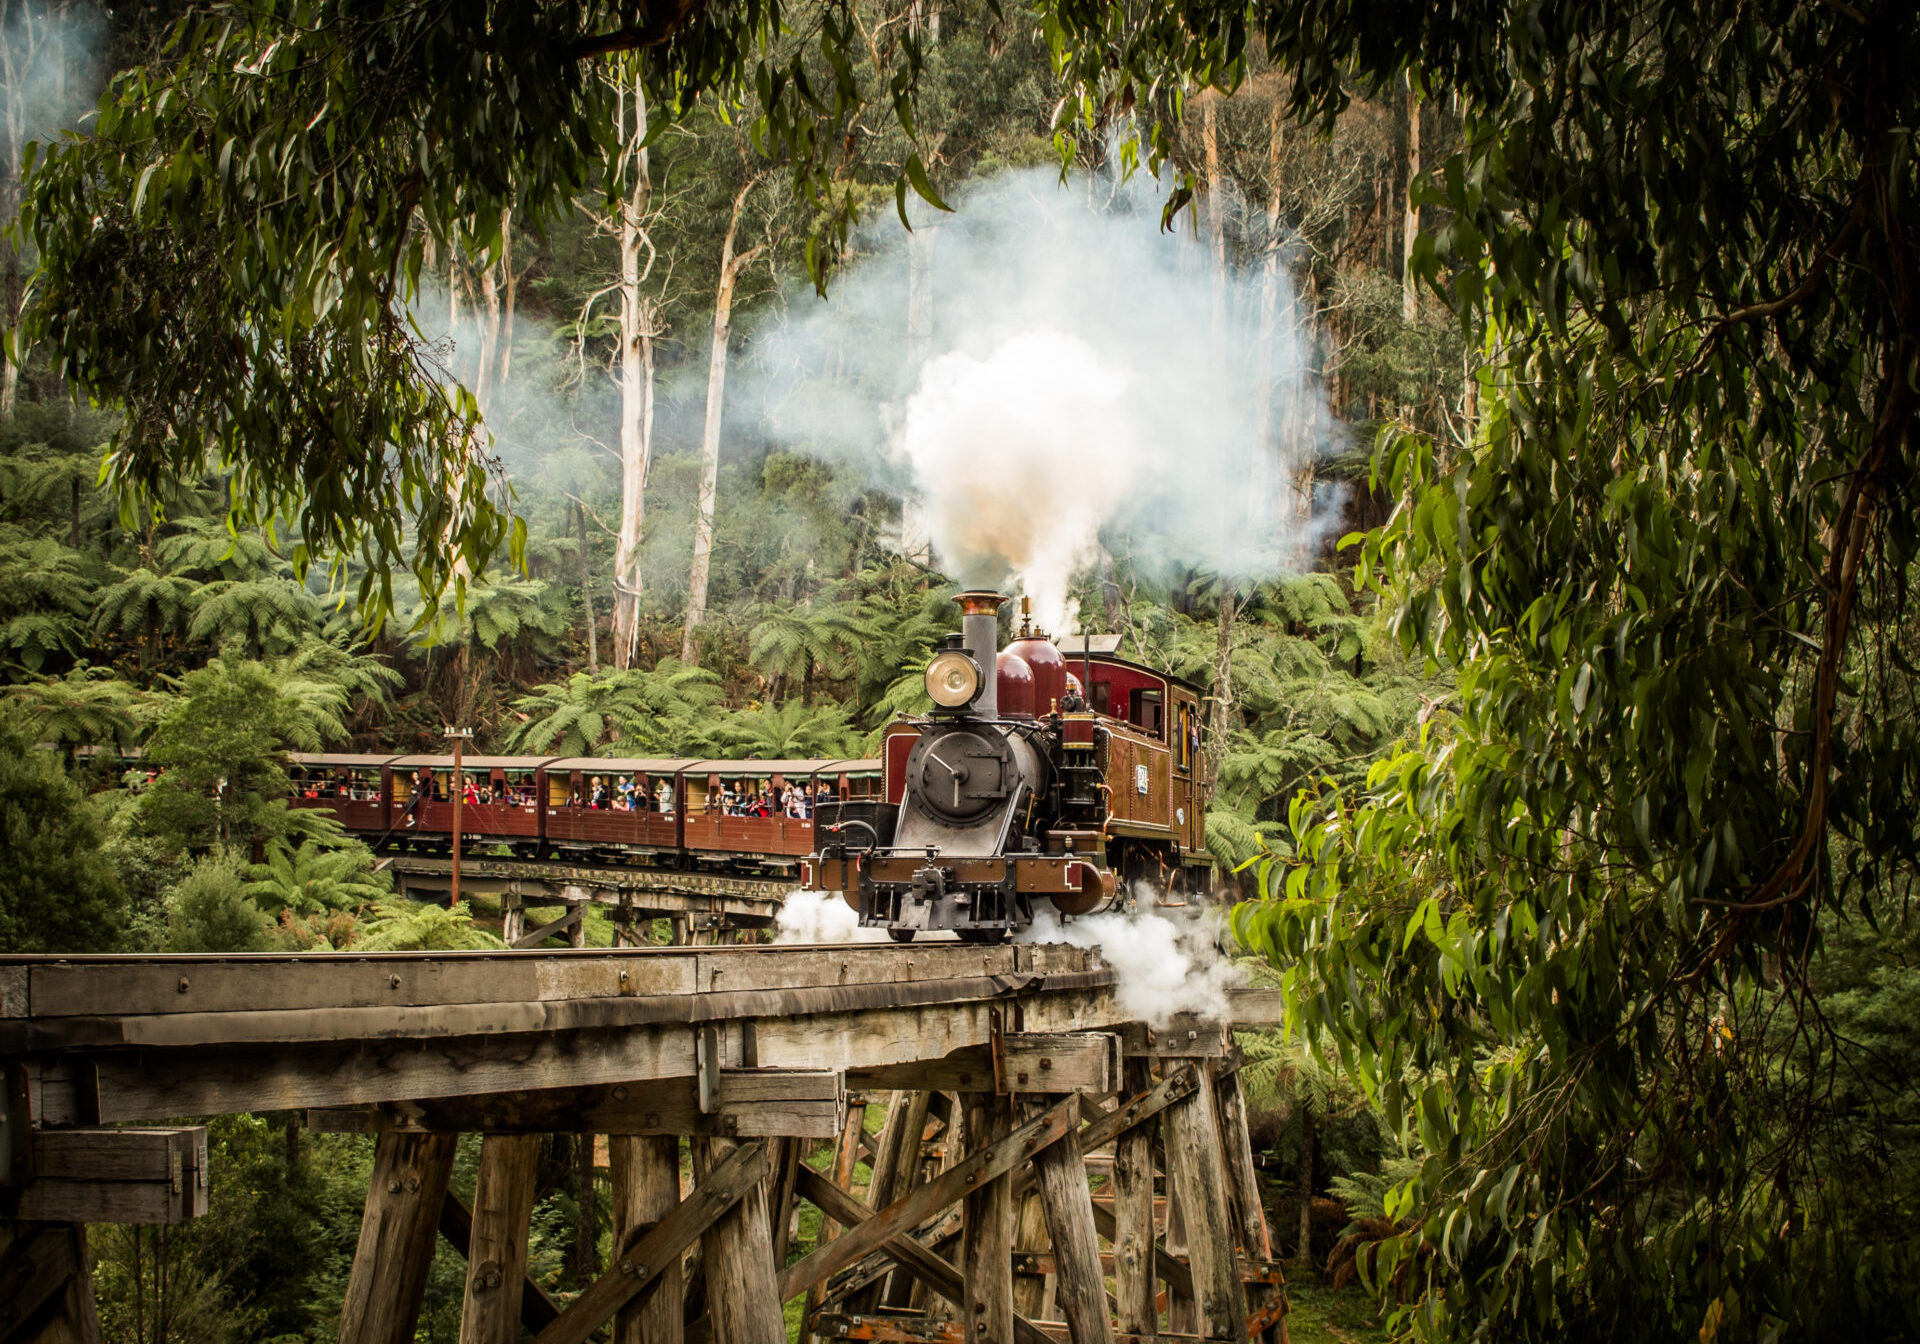 A steam locomotive hauling several open side carriages travels over a trestle bridge surrounded by ferns and mountain ash trees. Steam is billowing from the locomotive.